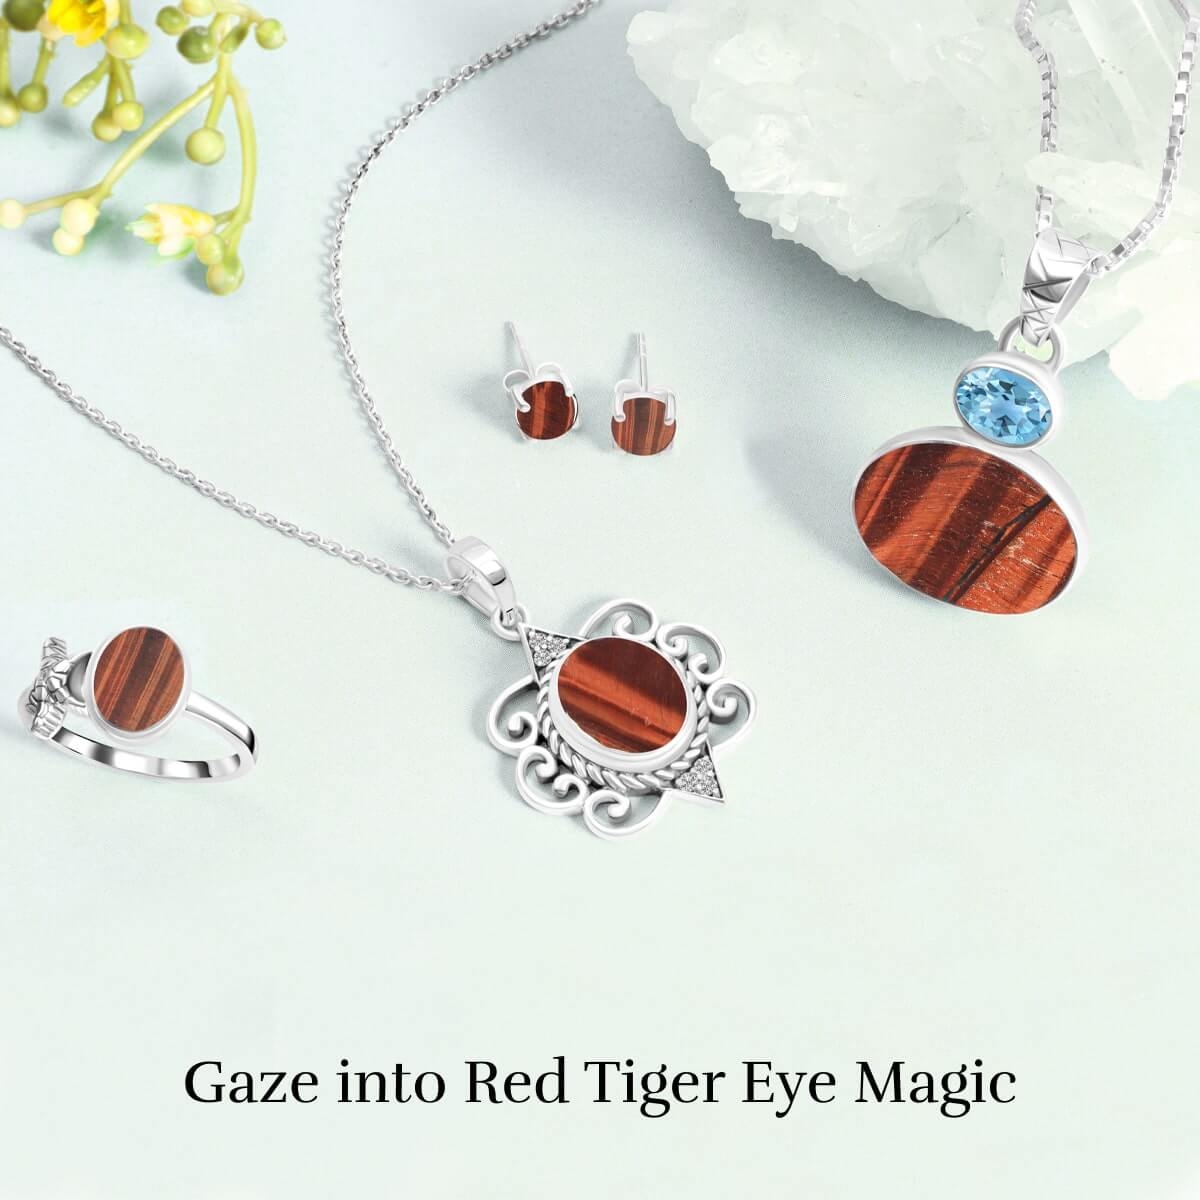 Silver Red Tiger Eye Meaning, History, Healing Properties, Uses, Zodiac Sign and Care